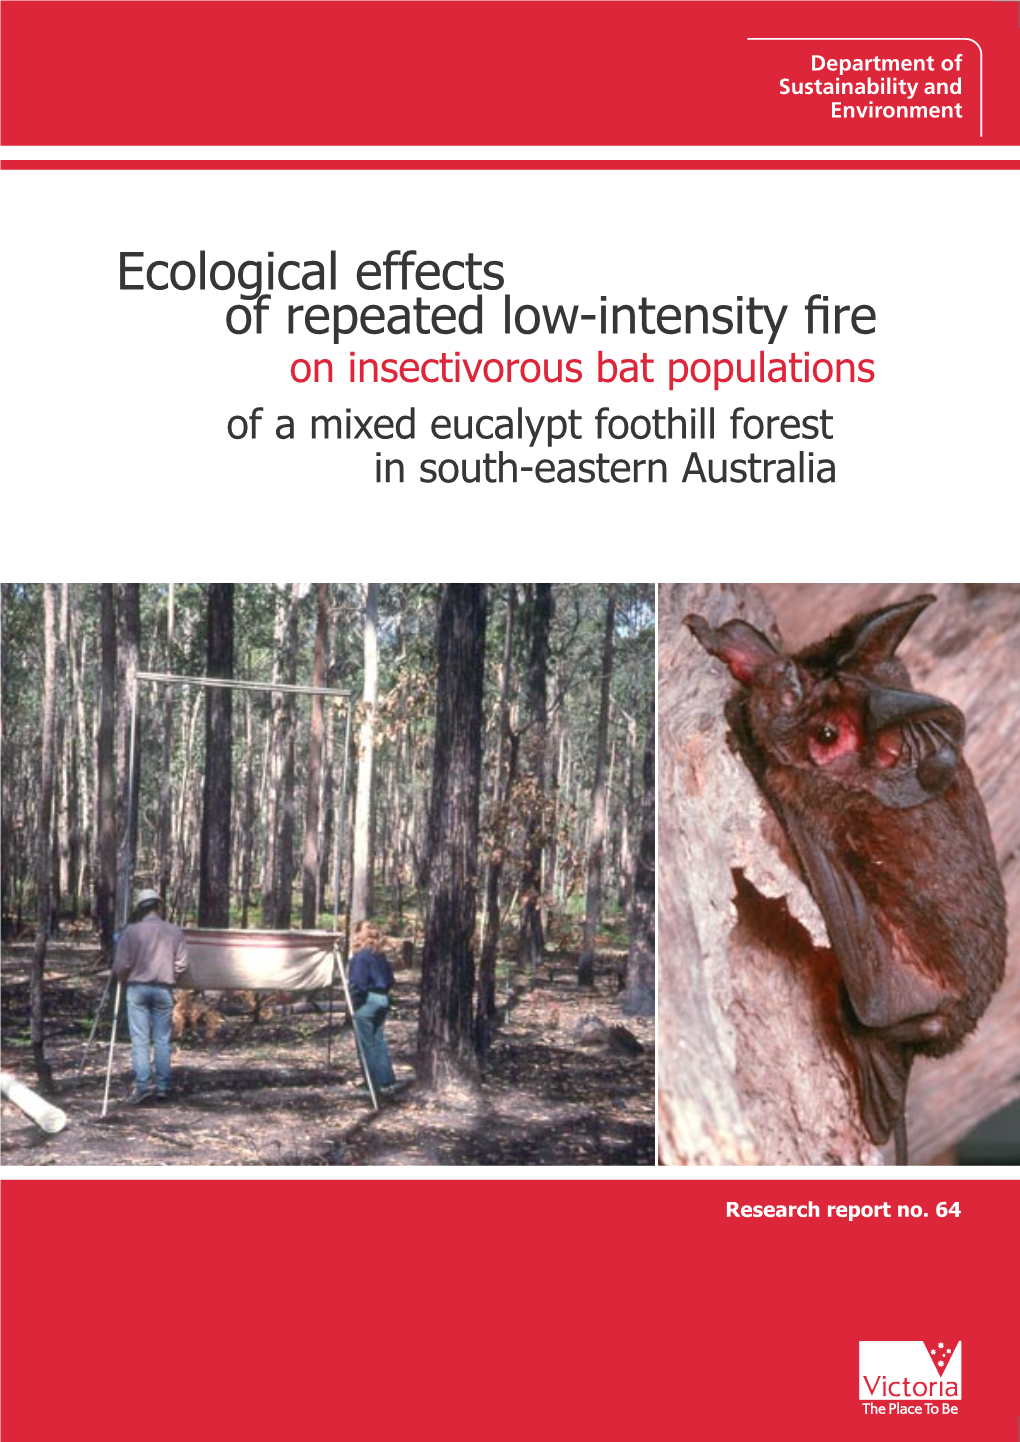 Effects of Repeated Low-Intensity Fire on Insectivorous Bat Populations of a Mixed Eucalypt Foothill Forest in South-Eastern Australia